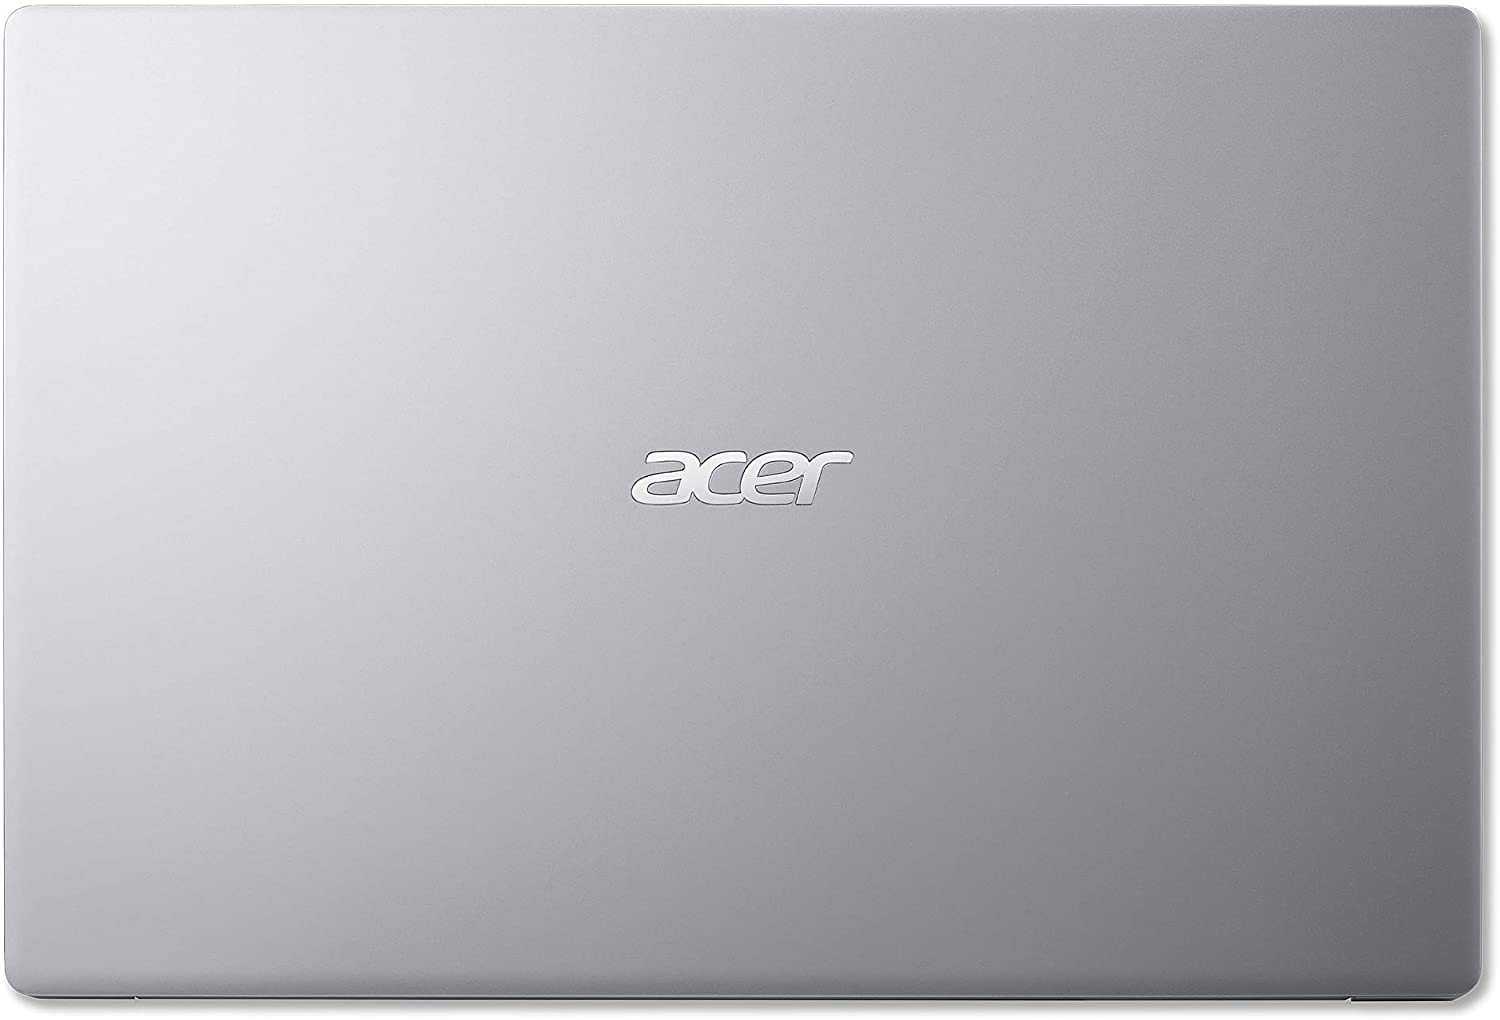 Acer Newest Swift 3 Thin and Light Laptop, 14